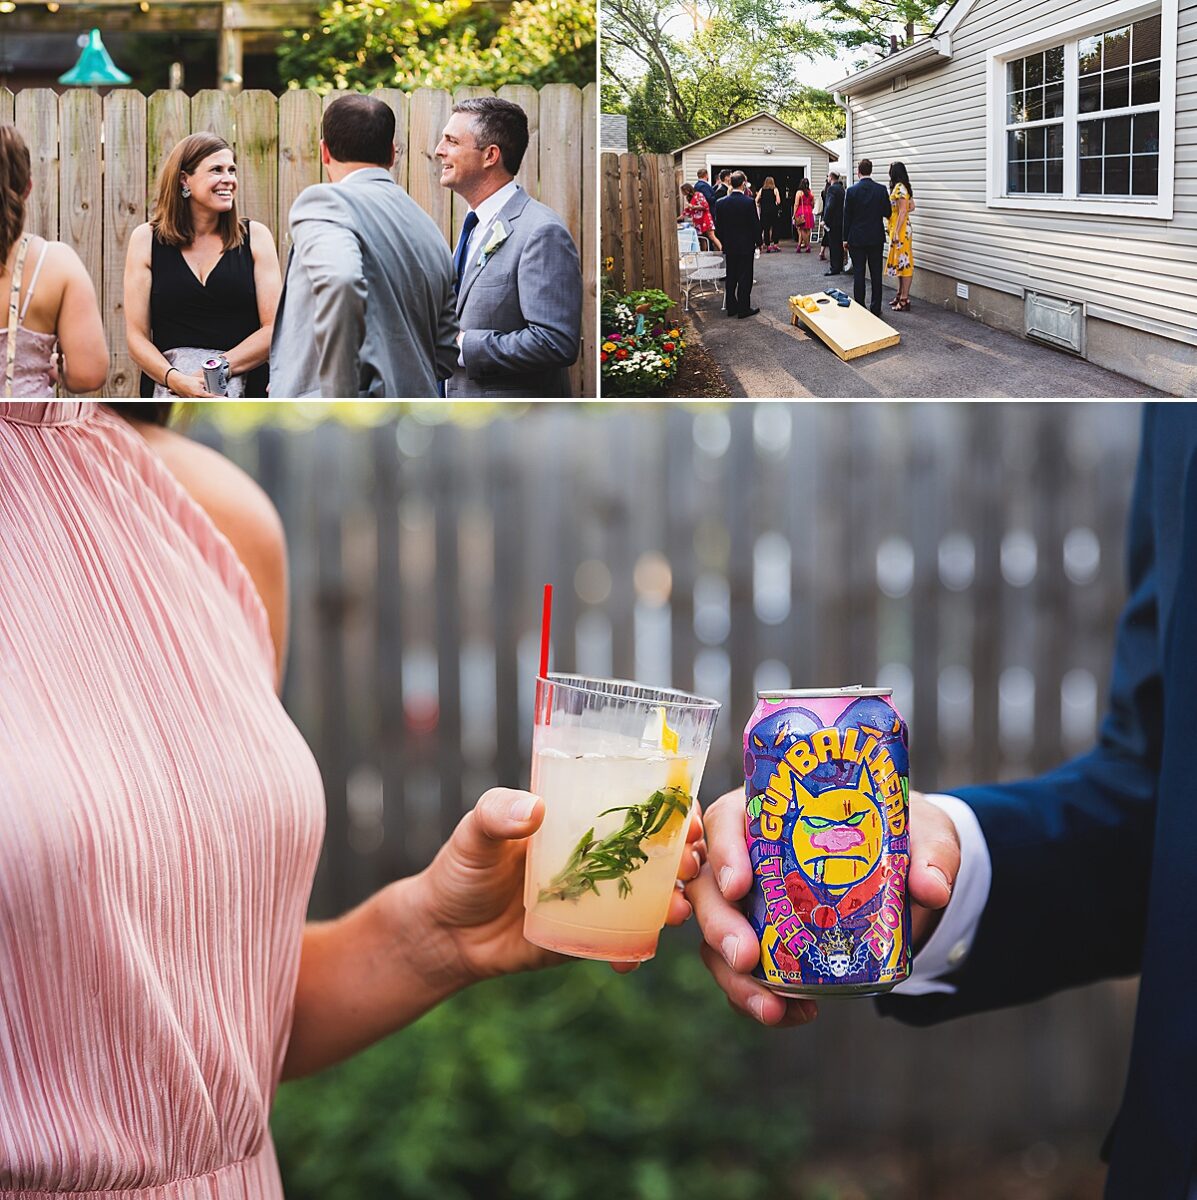 Backyard Wedding During Covid | Indianapolis Wedding Photographers | casey and her camera